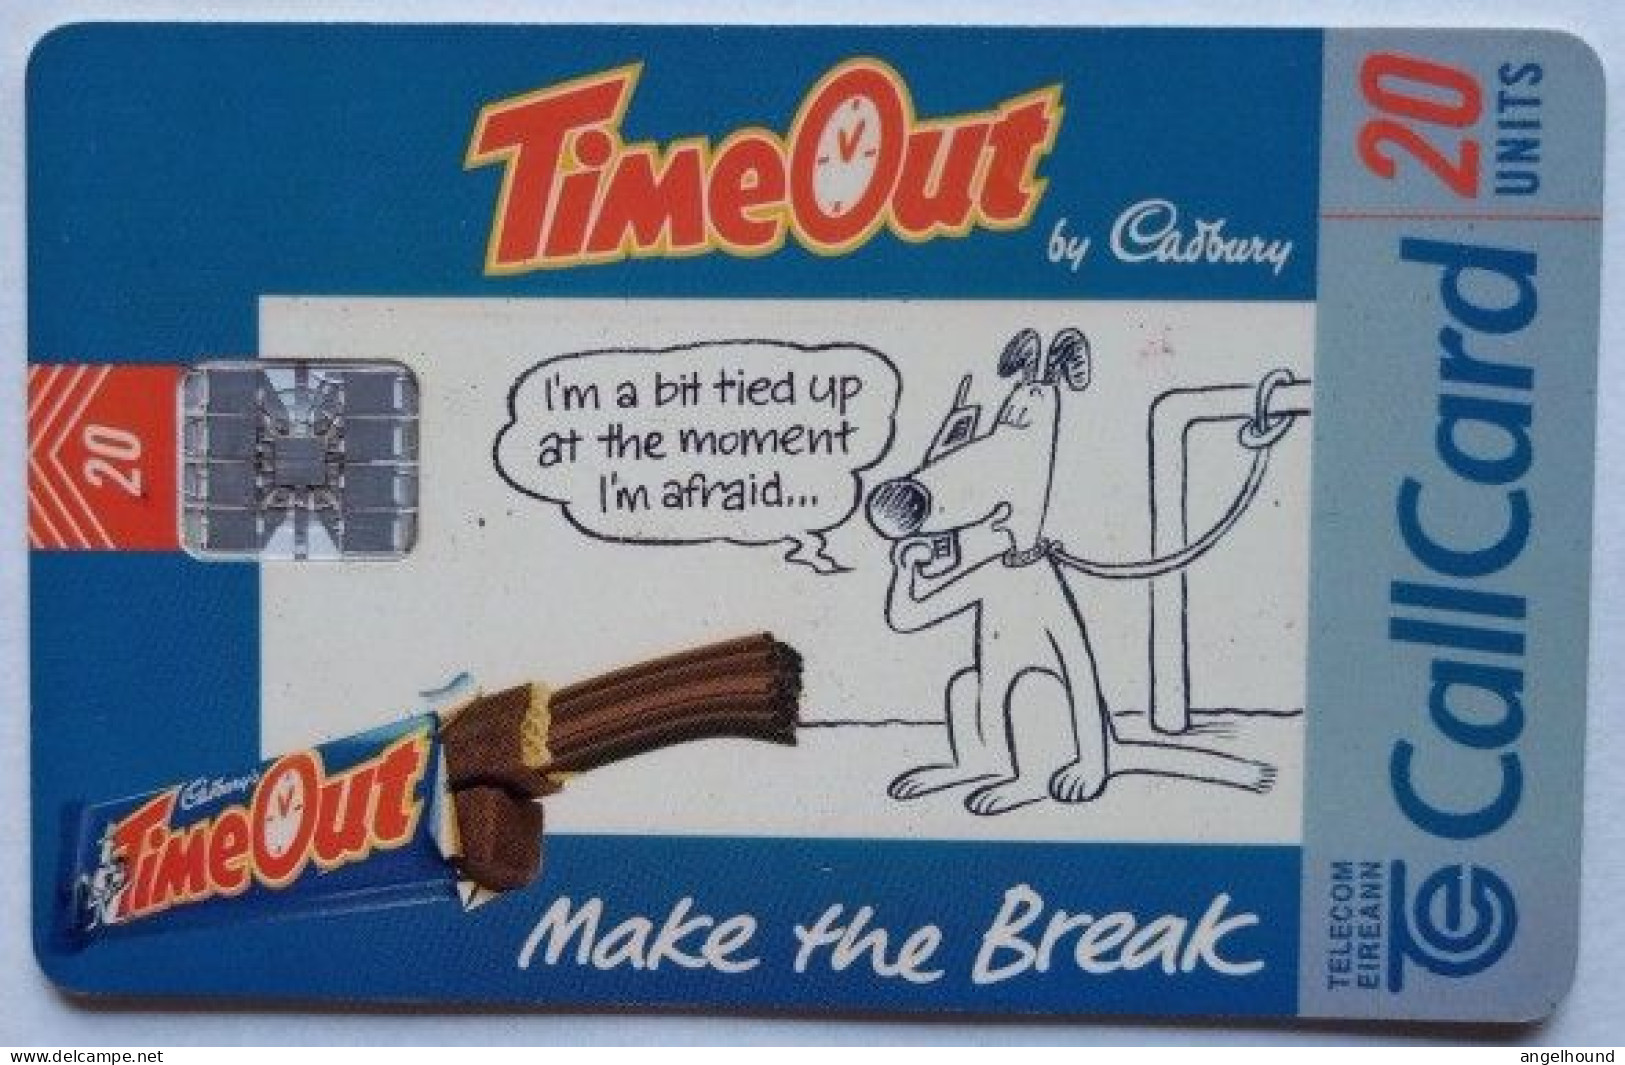 Ireland 20 Units Chip Card - Cadbury's Time Out - Irland